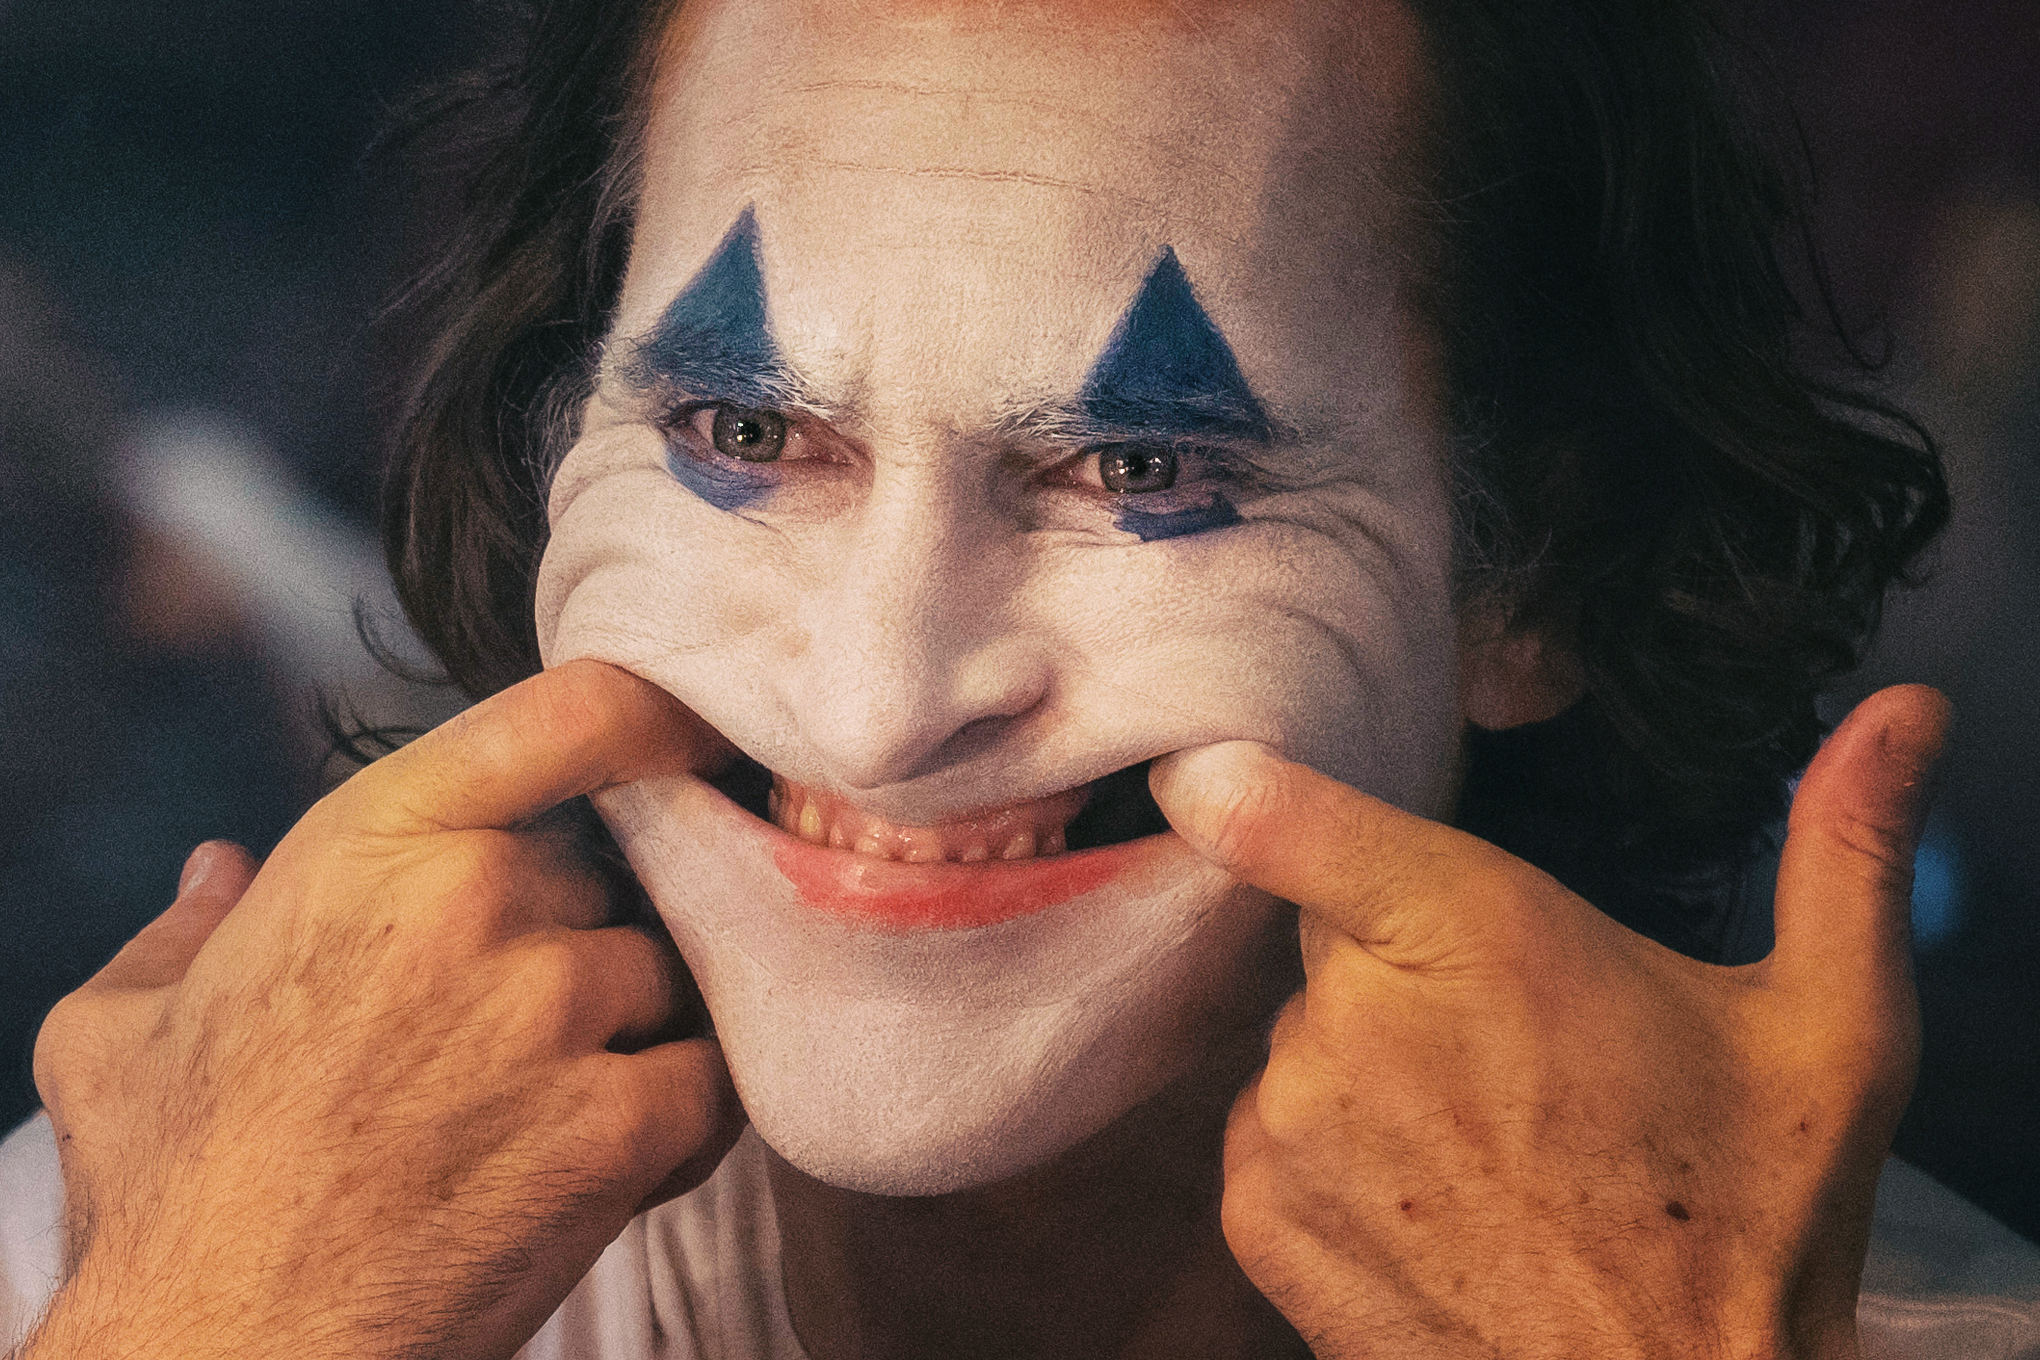 Joaquin Phoenix as the Joker pulls his mouth into a demonic grin